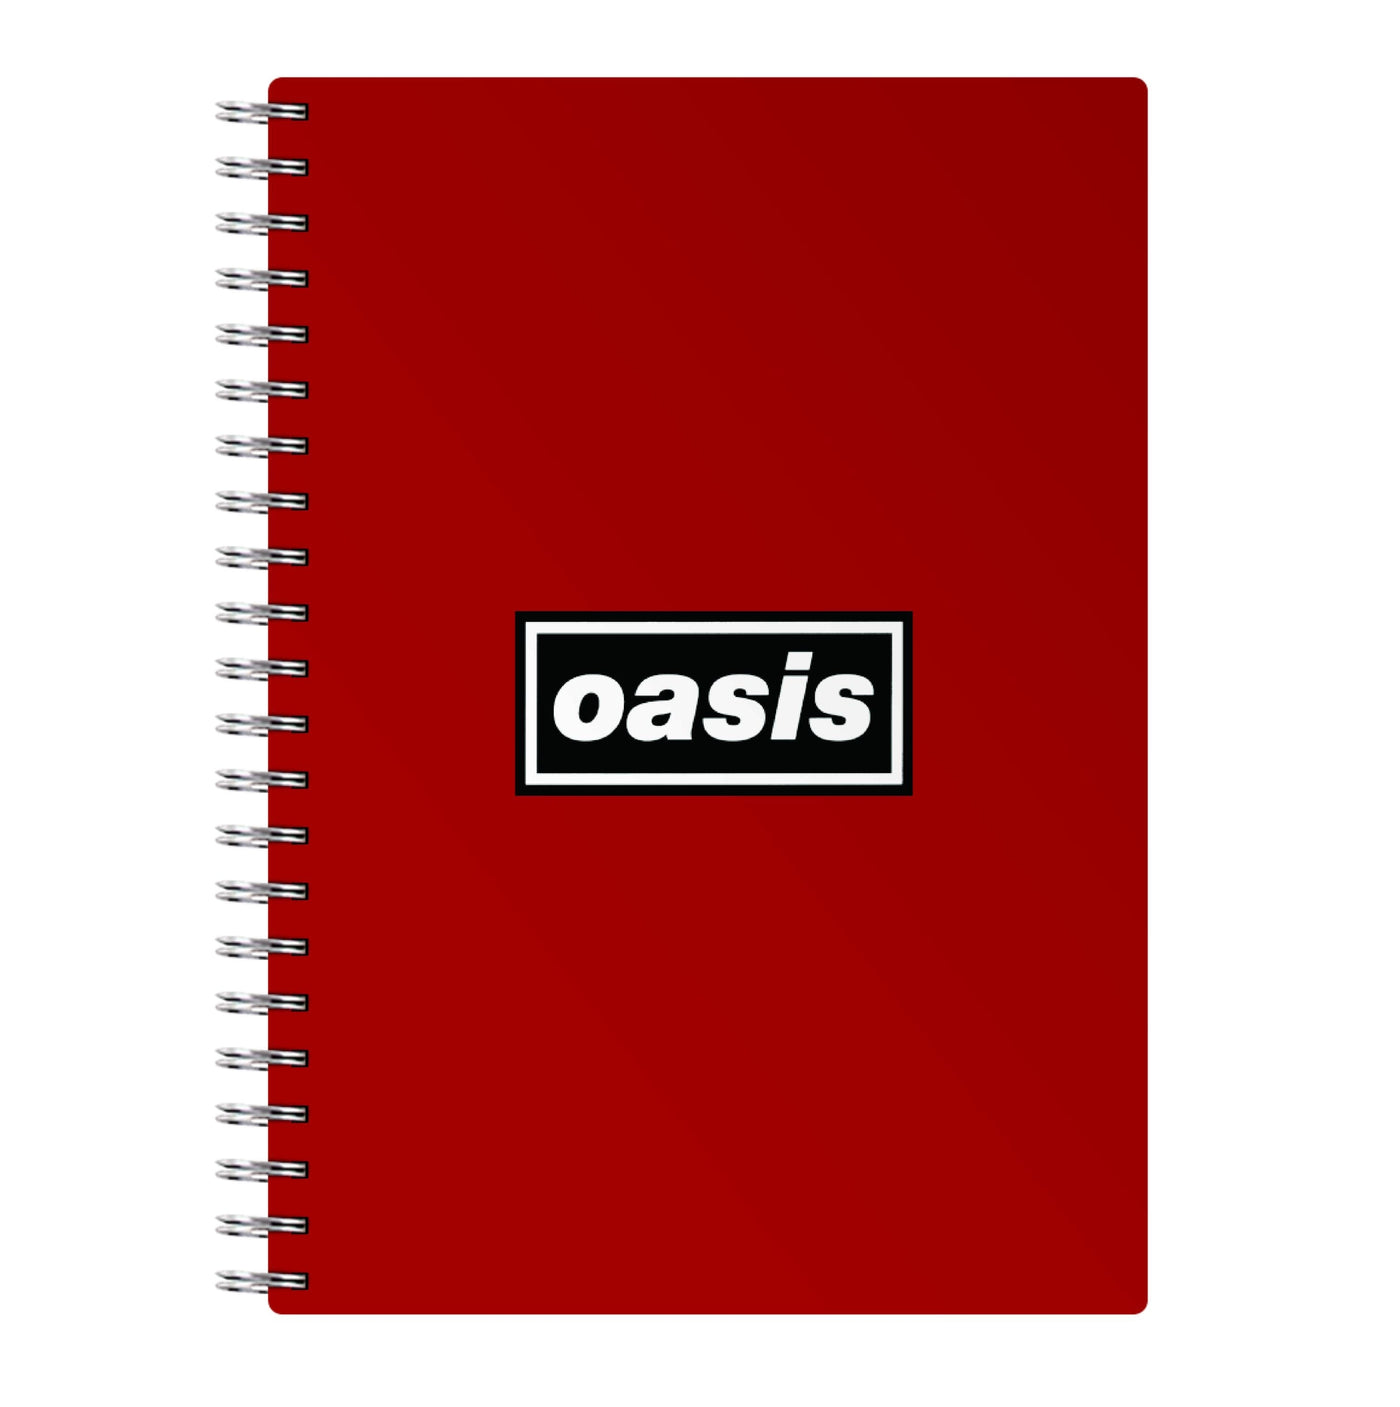 Band Name Red - Oasis Notebook